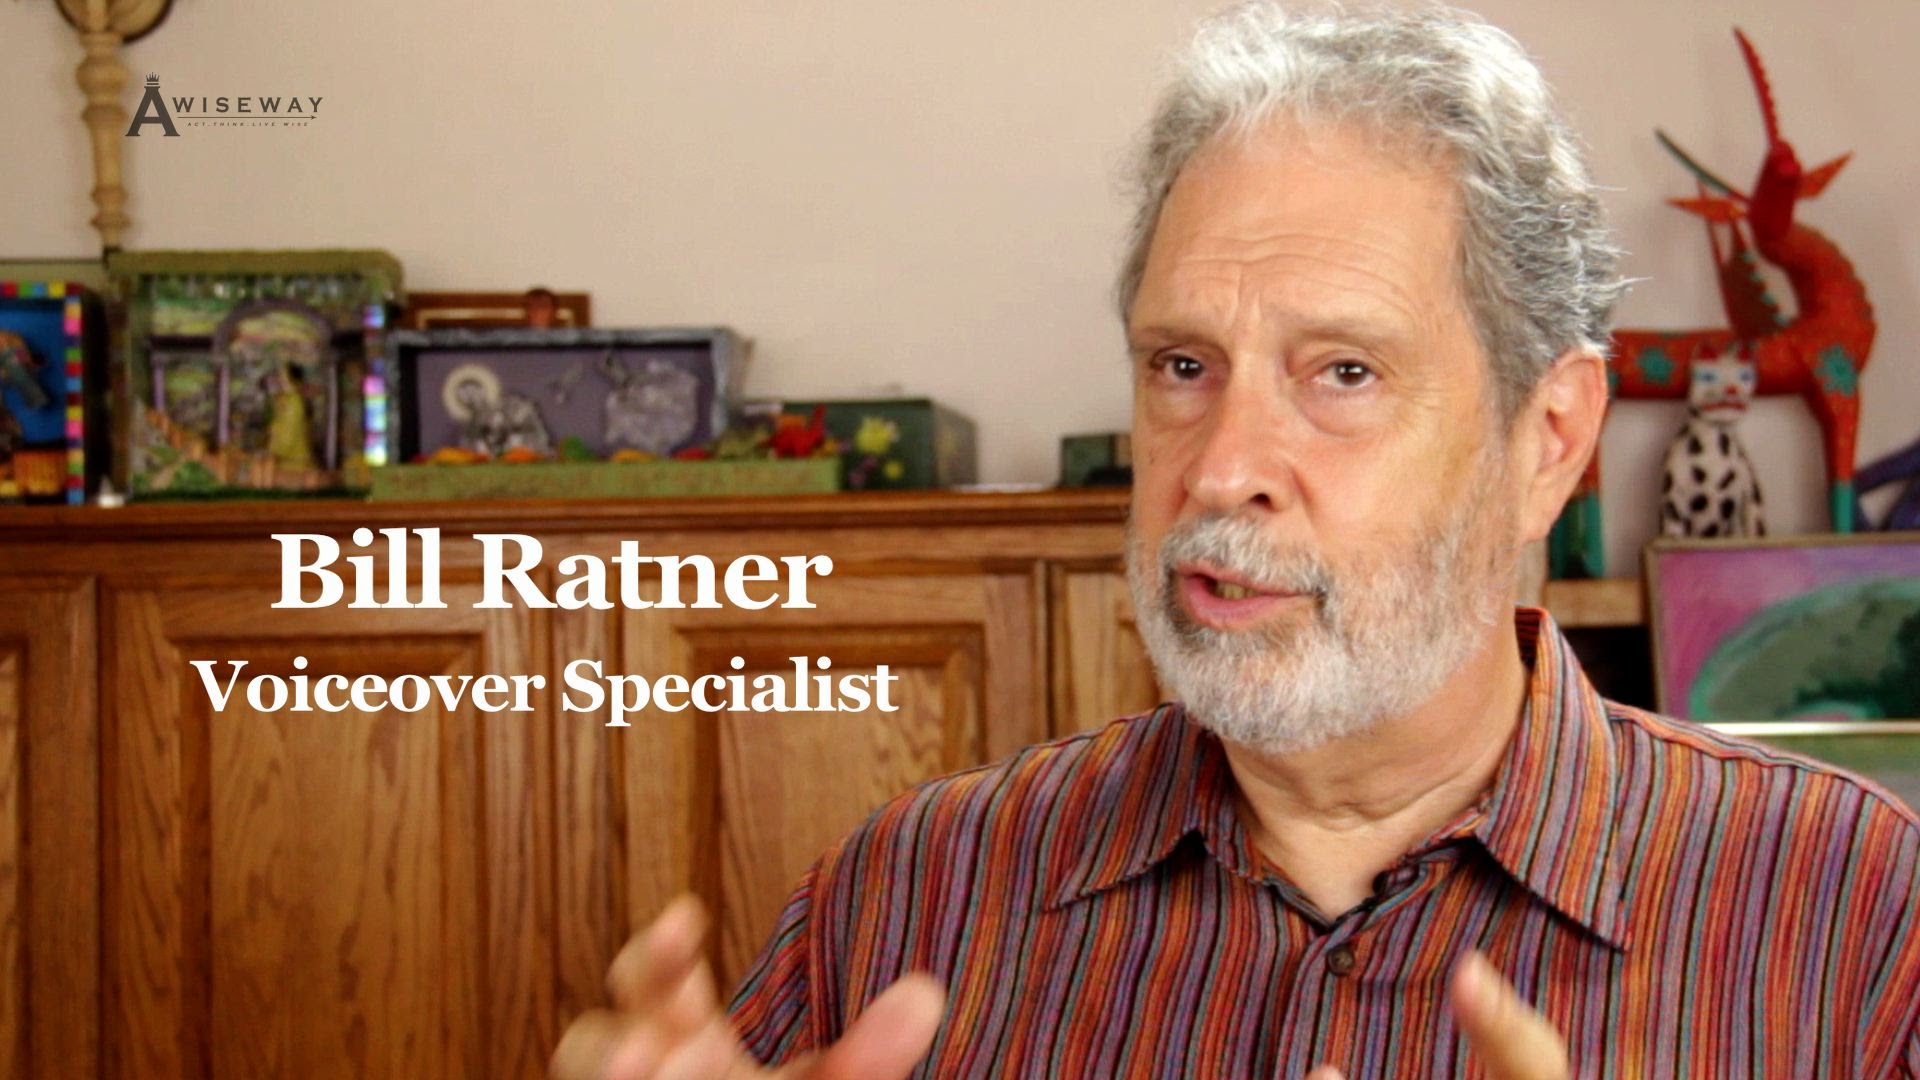 Voiceover Specialist Says the Top Qualities You Need to be Successful in the Industry